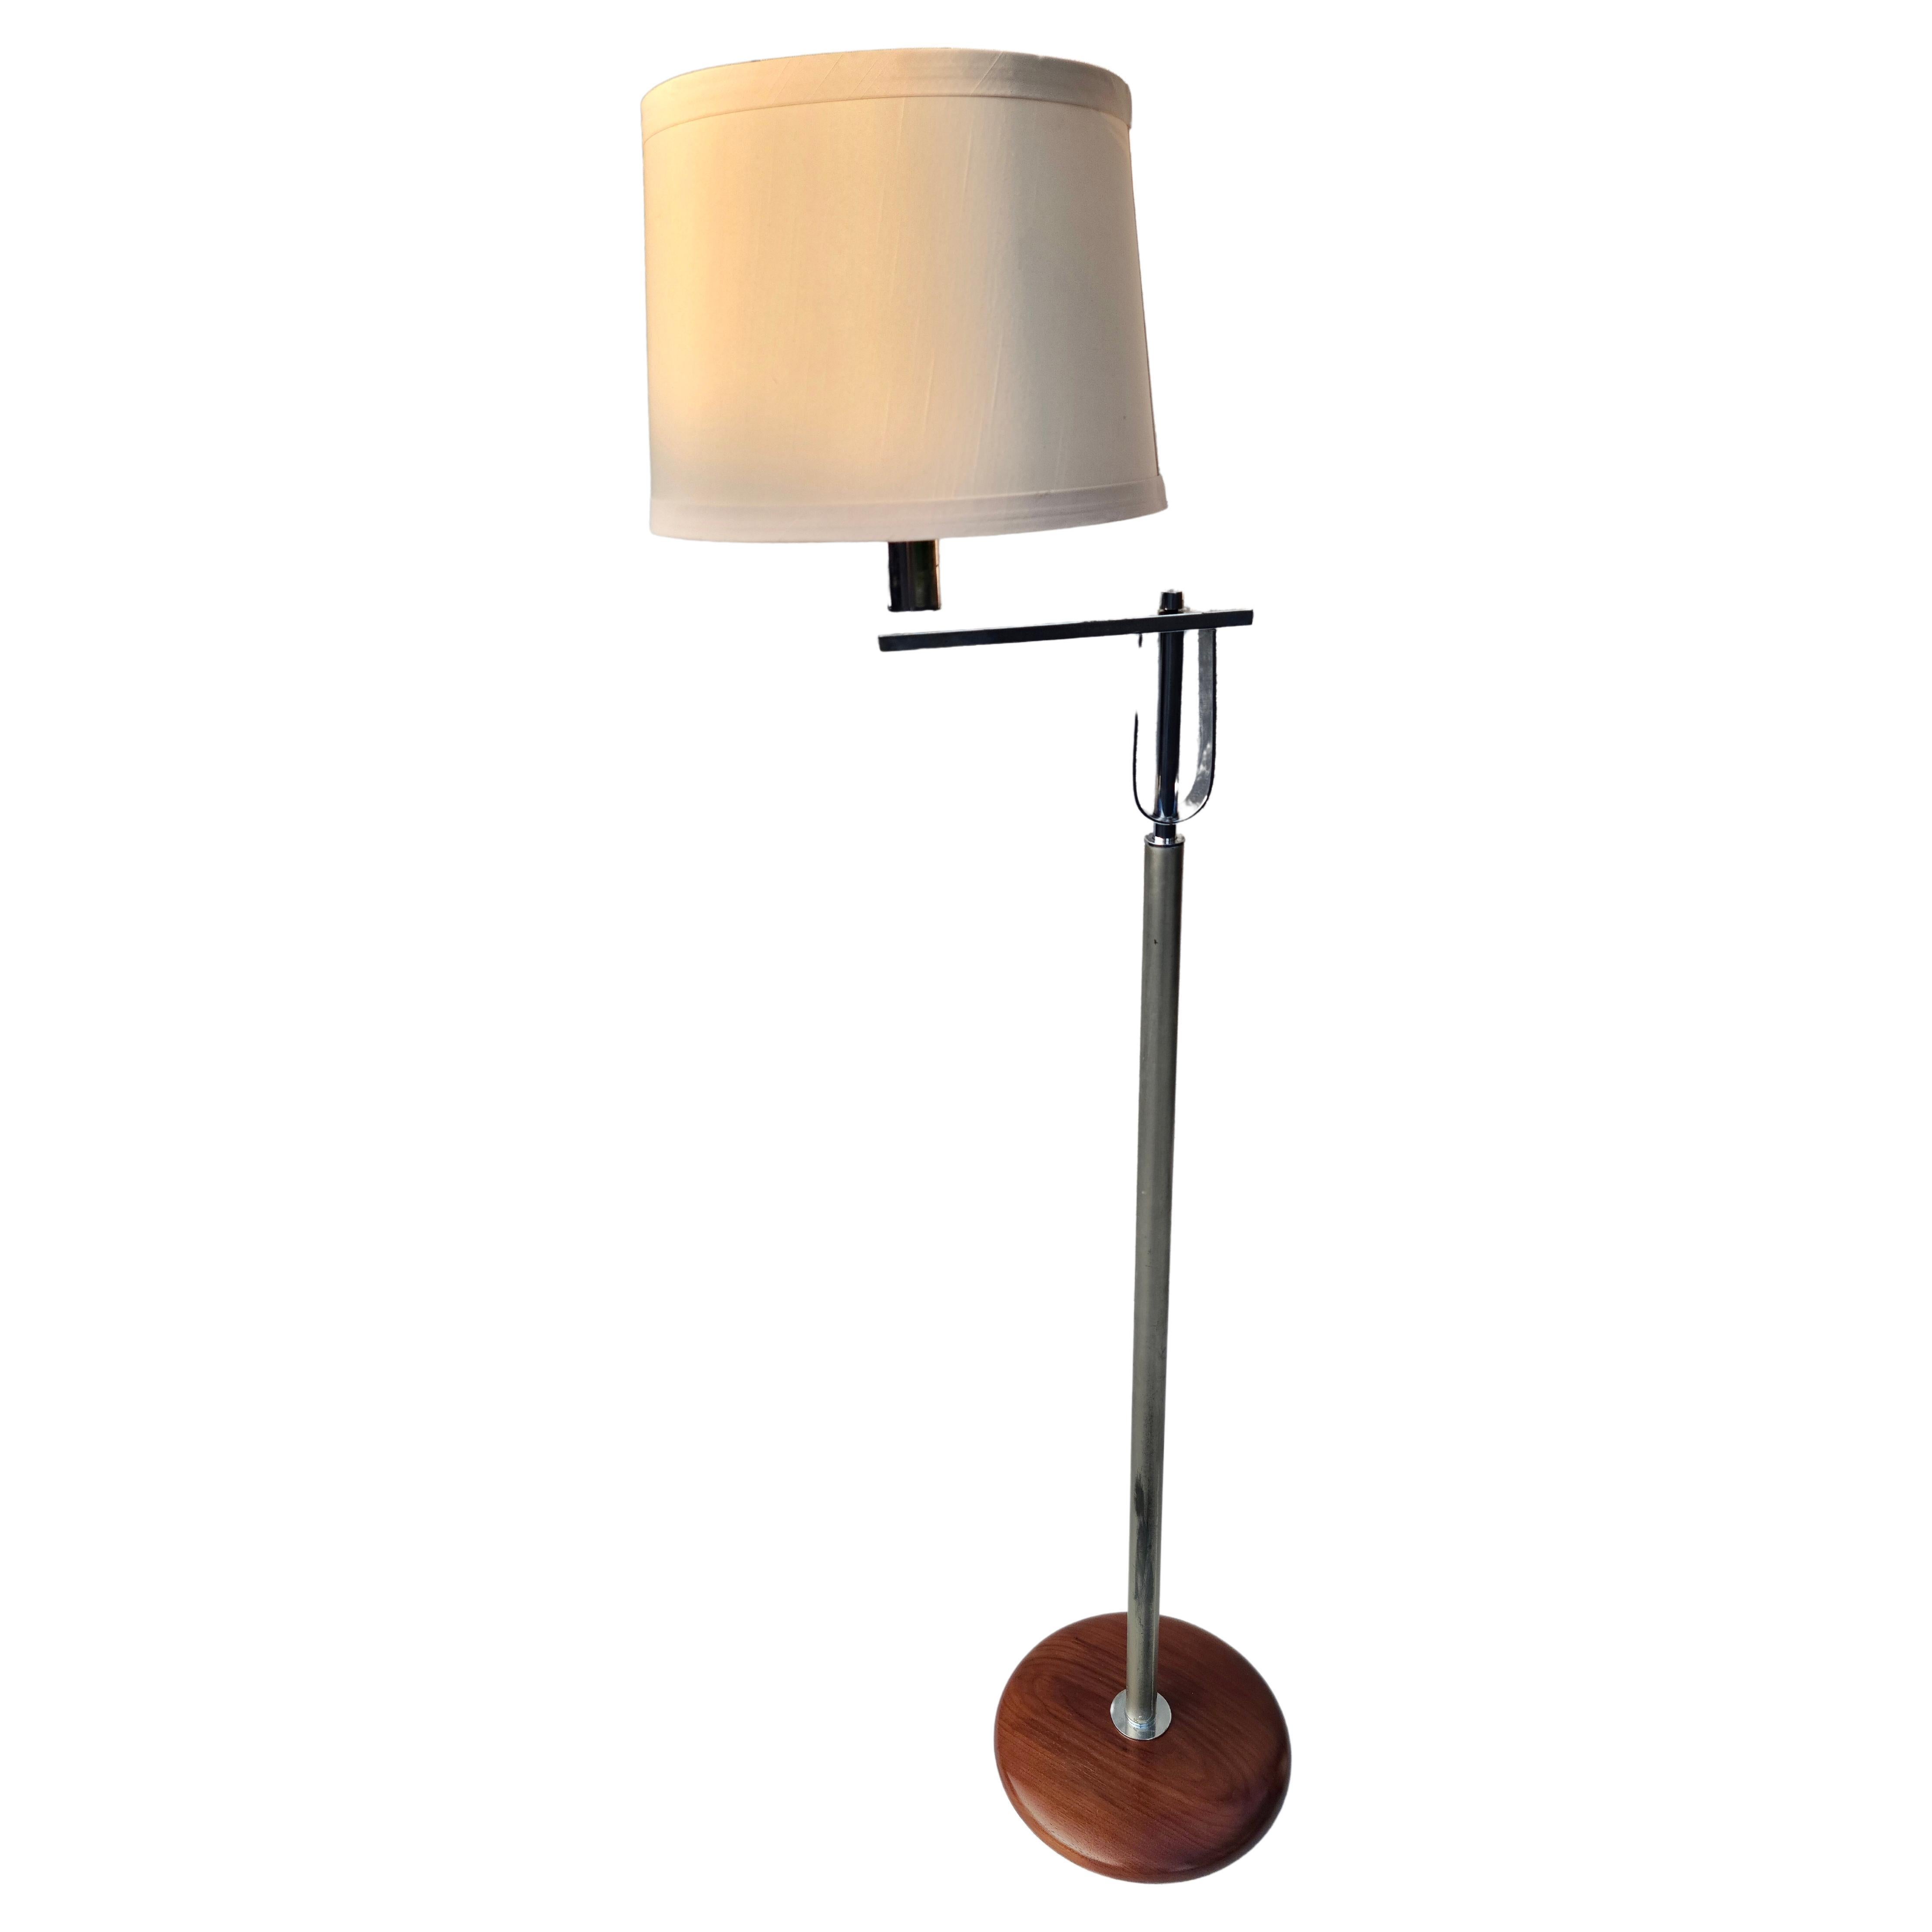 Mid-20th Century Streamline Floor Lamp Flat Banded Chrome Walnut in the style of Donald Deskey For Sale